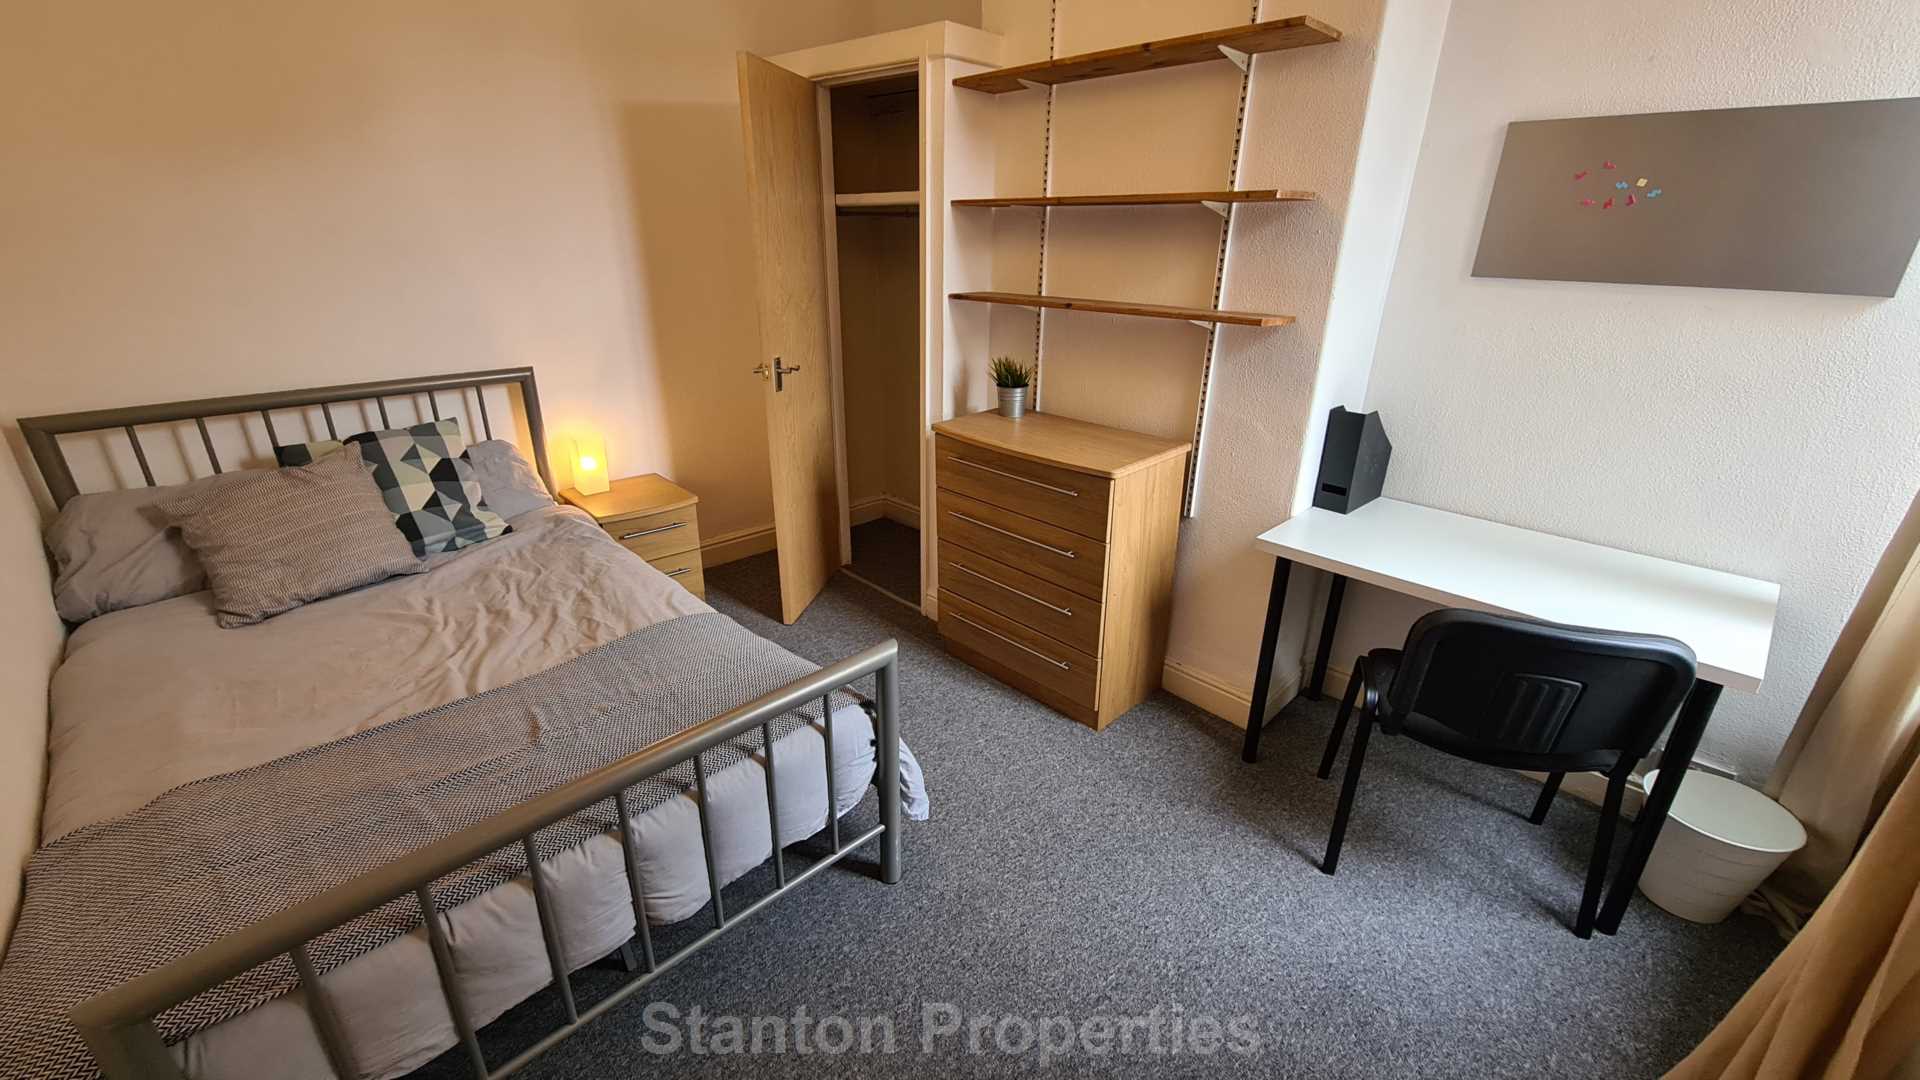 £130 pppw, See Video Tour, Mabfield Road, Fallowfield, Image 25